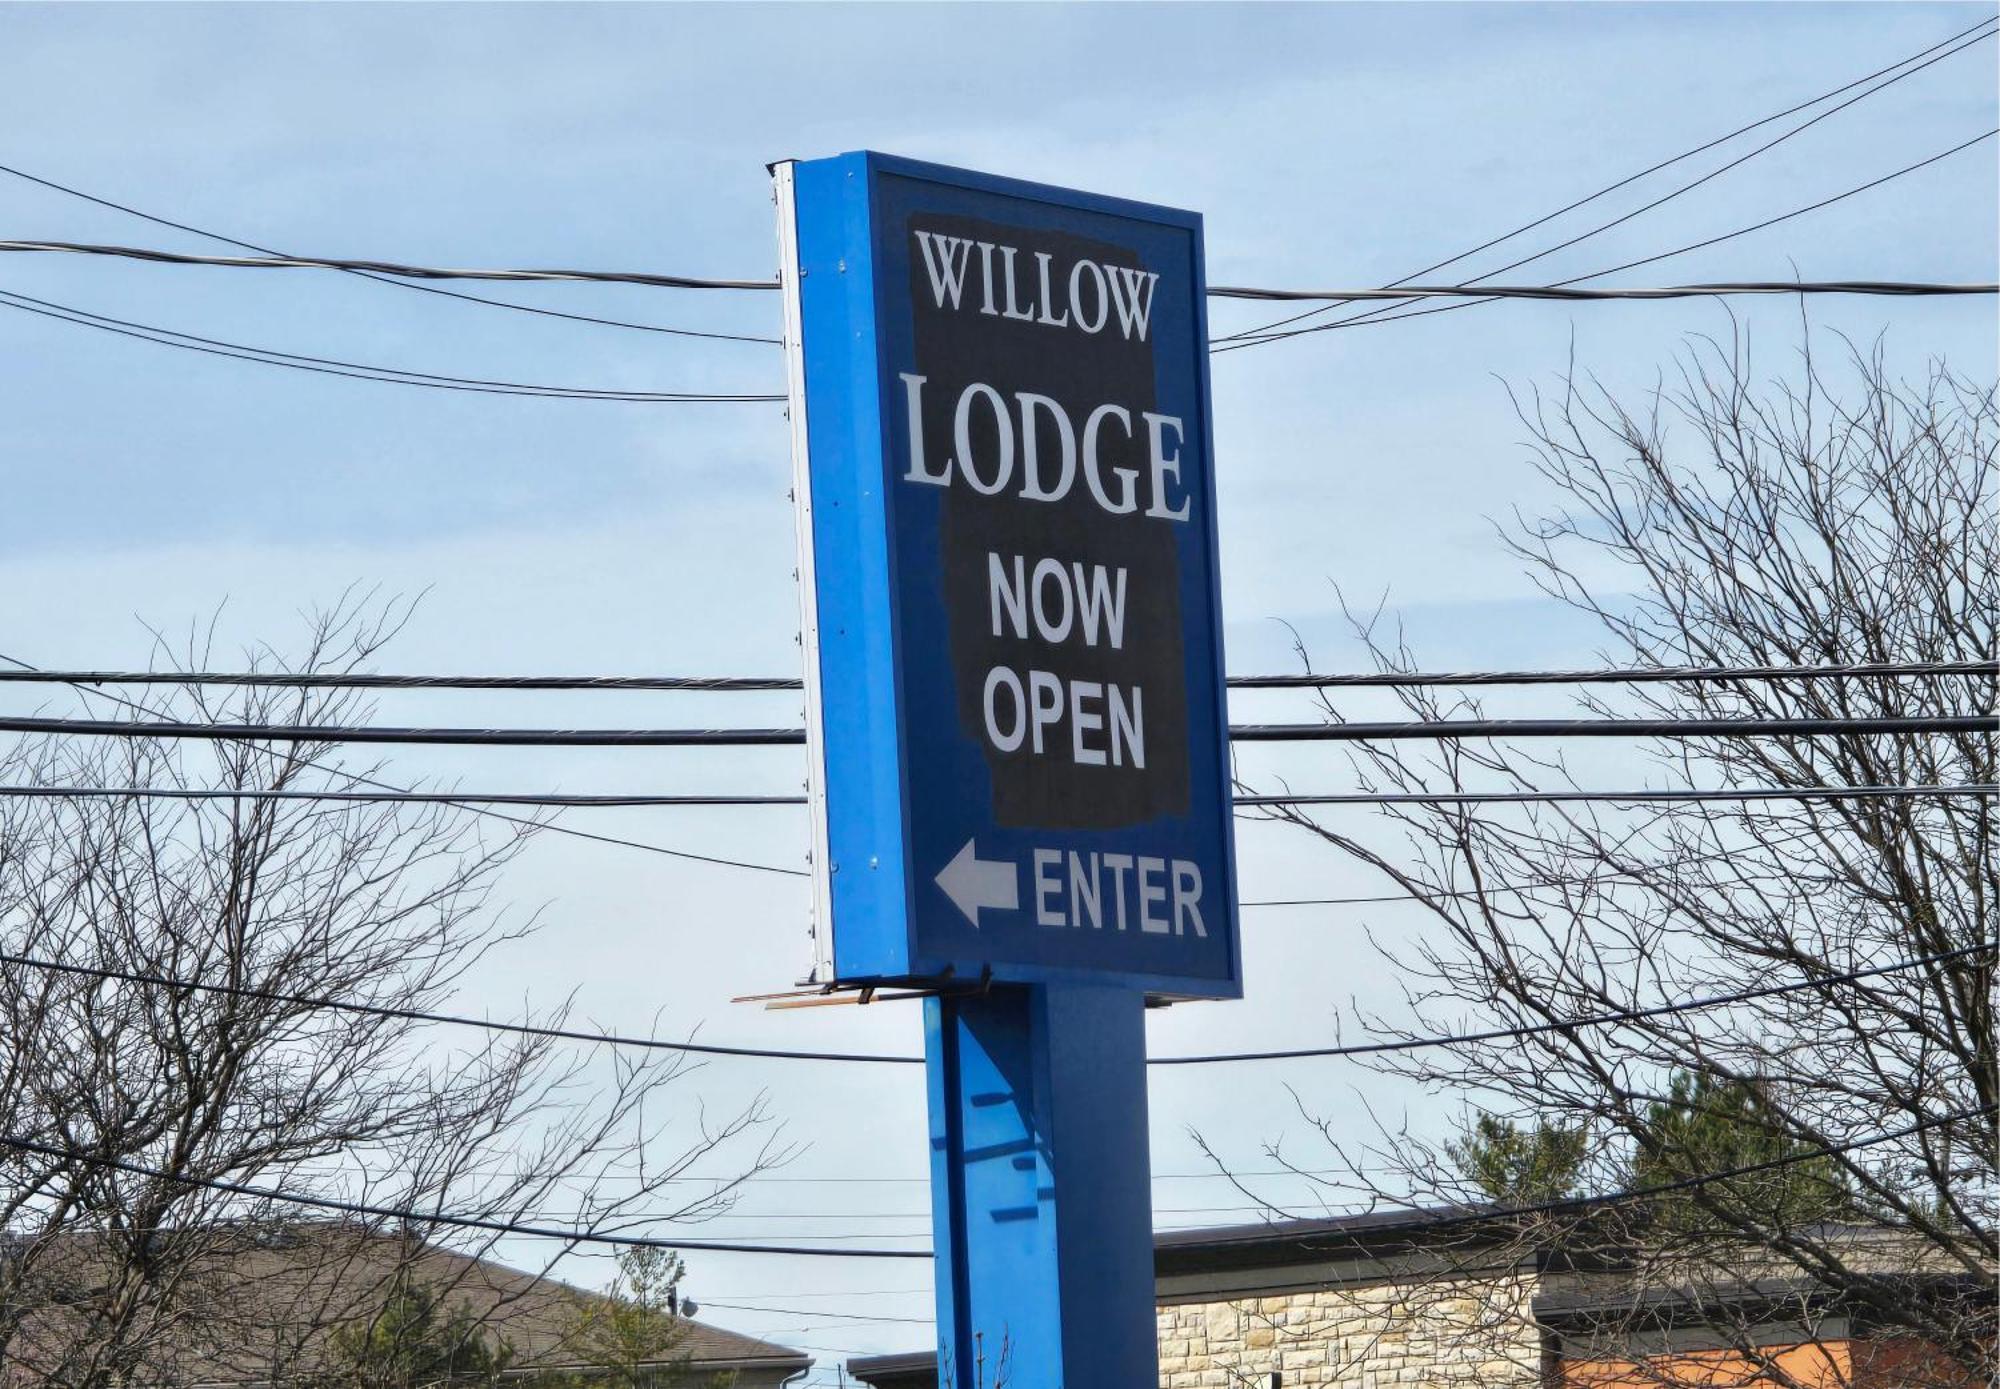 Willow Lodge Willoughby Cleveland ภายนอก รูปภาพ